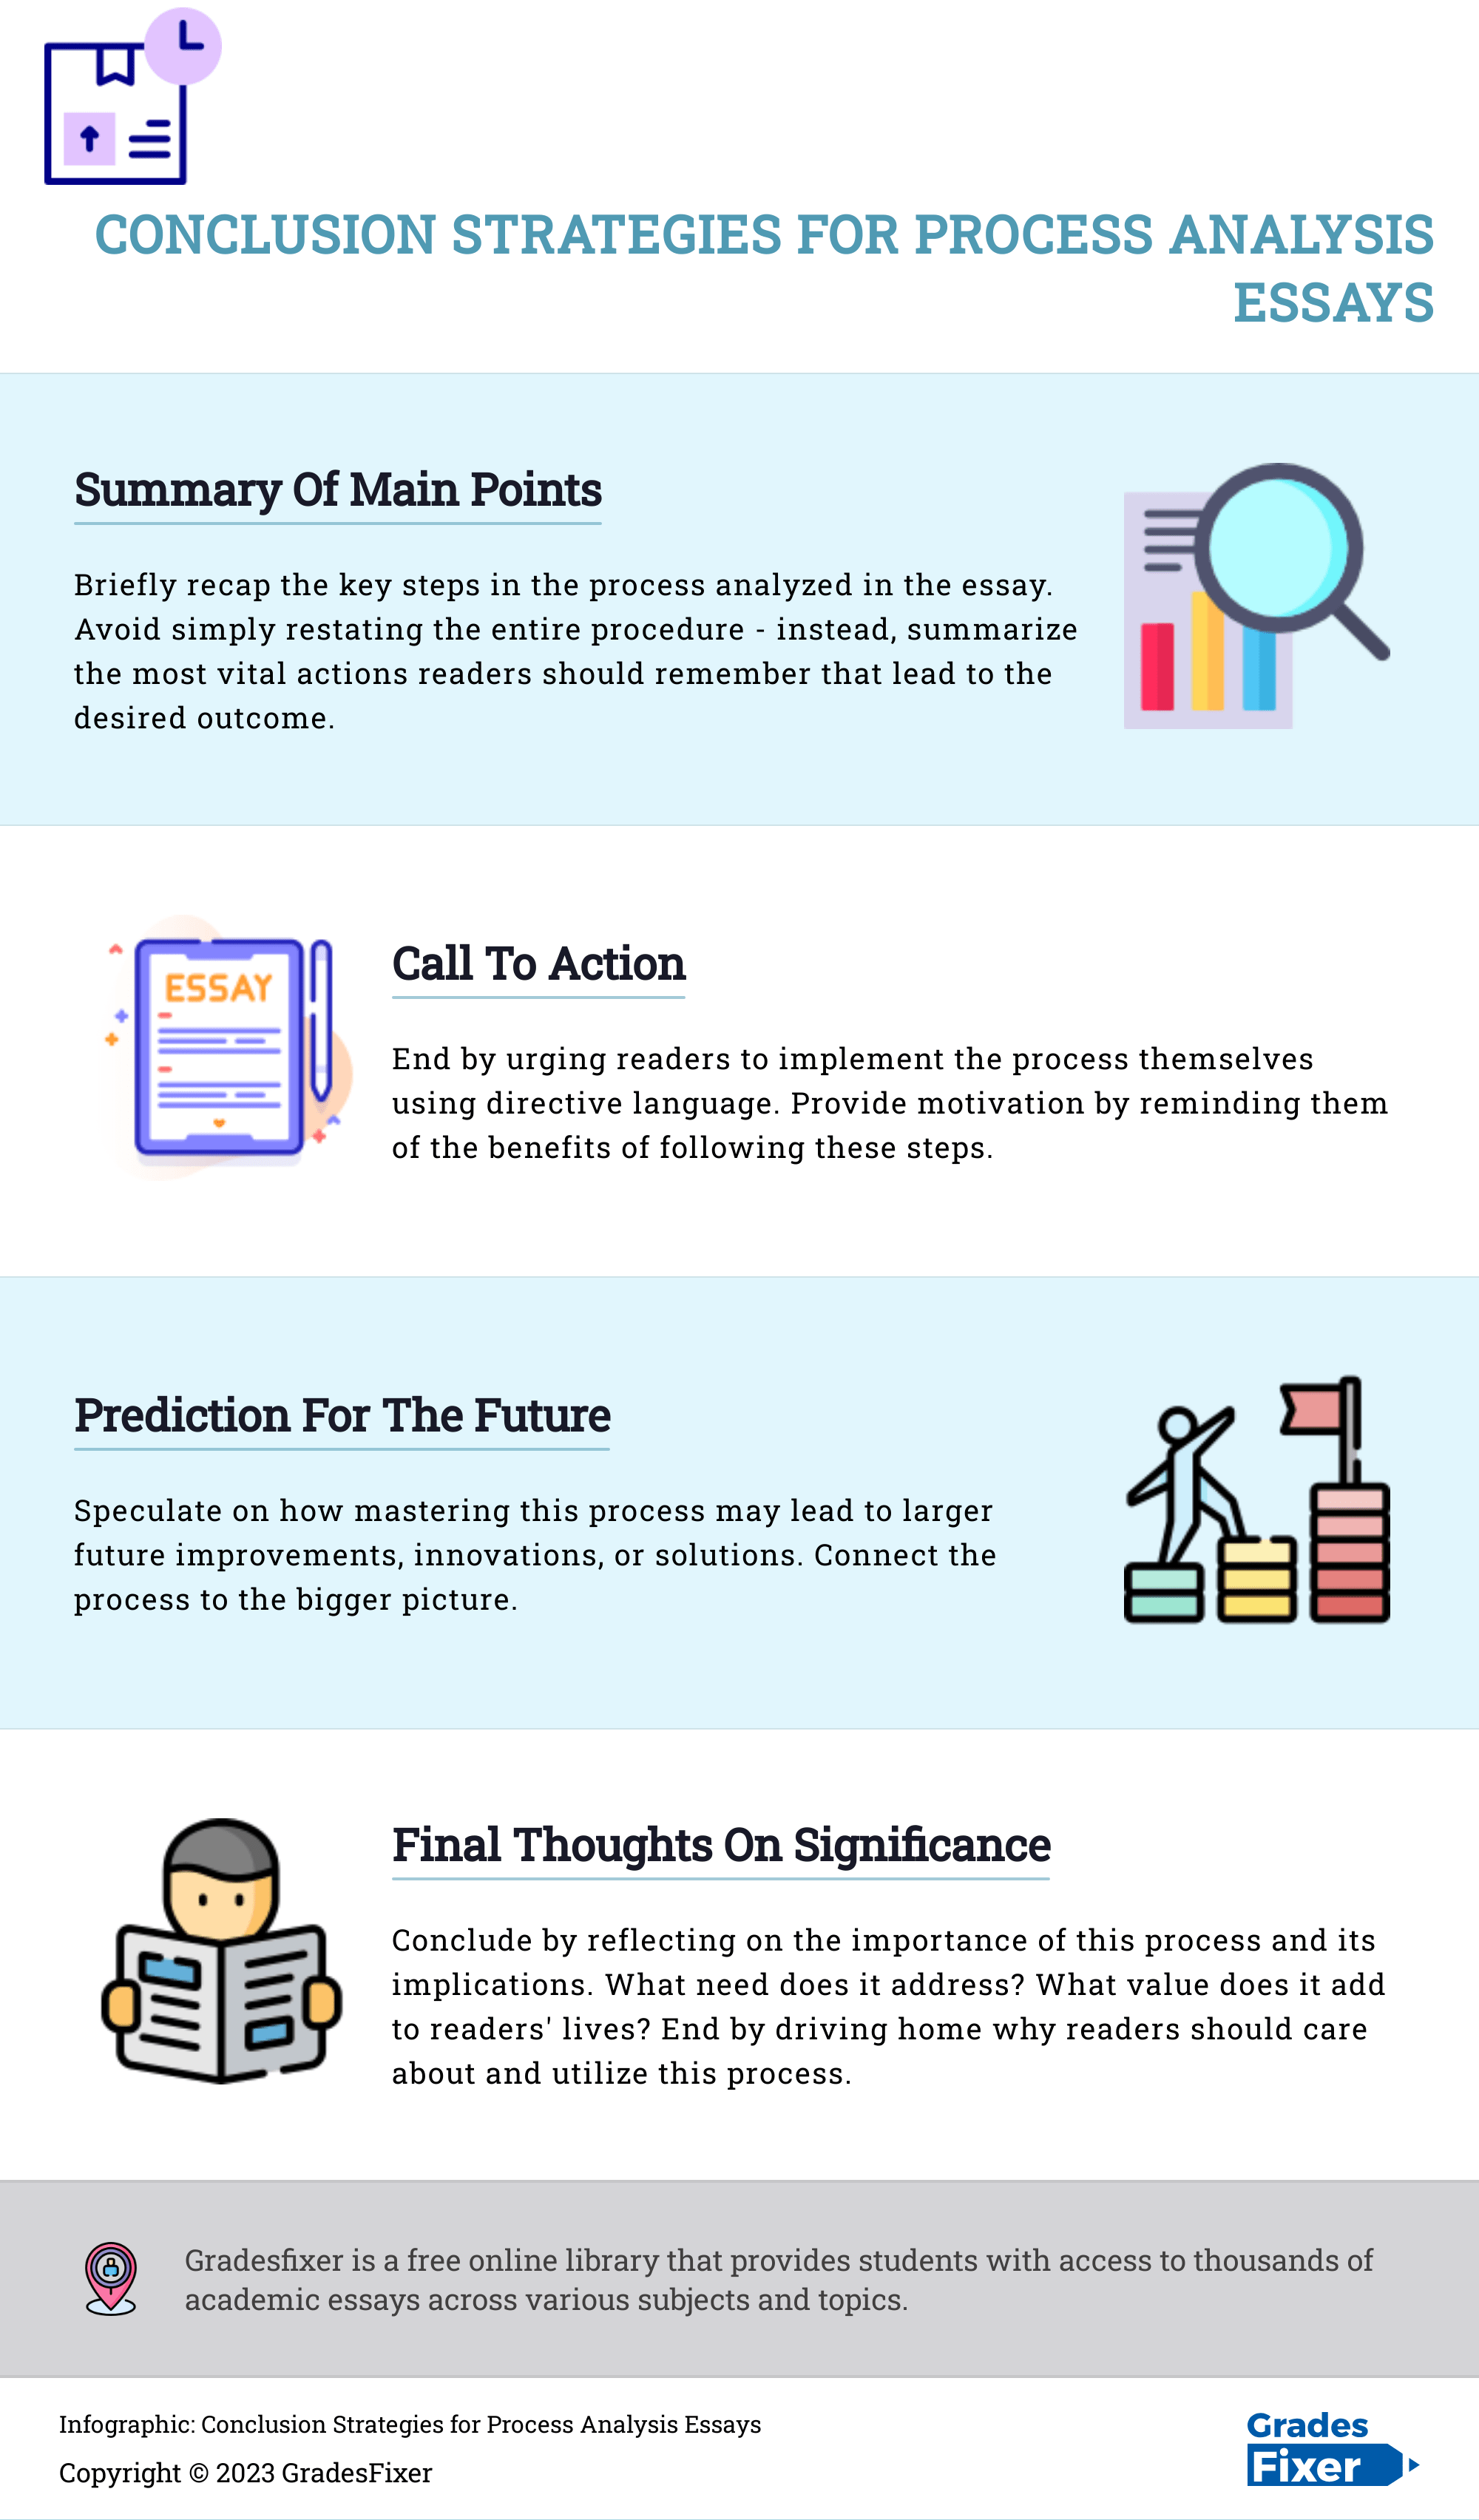 Infographic-Conclusion-Strategies-for-Process-Analysis-Essays